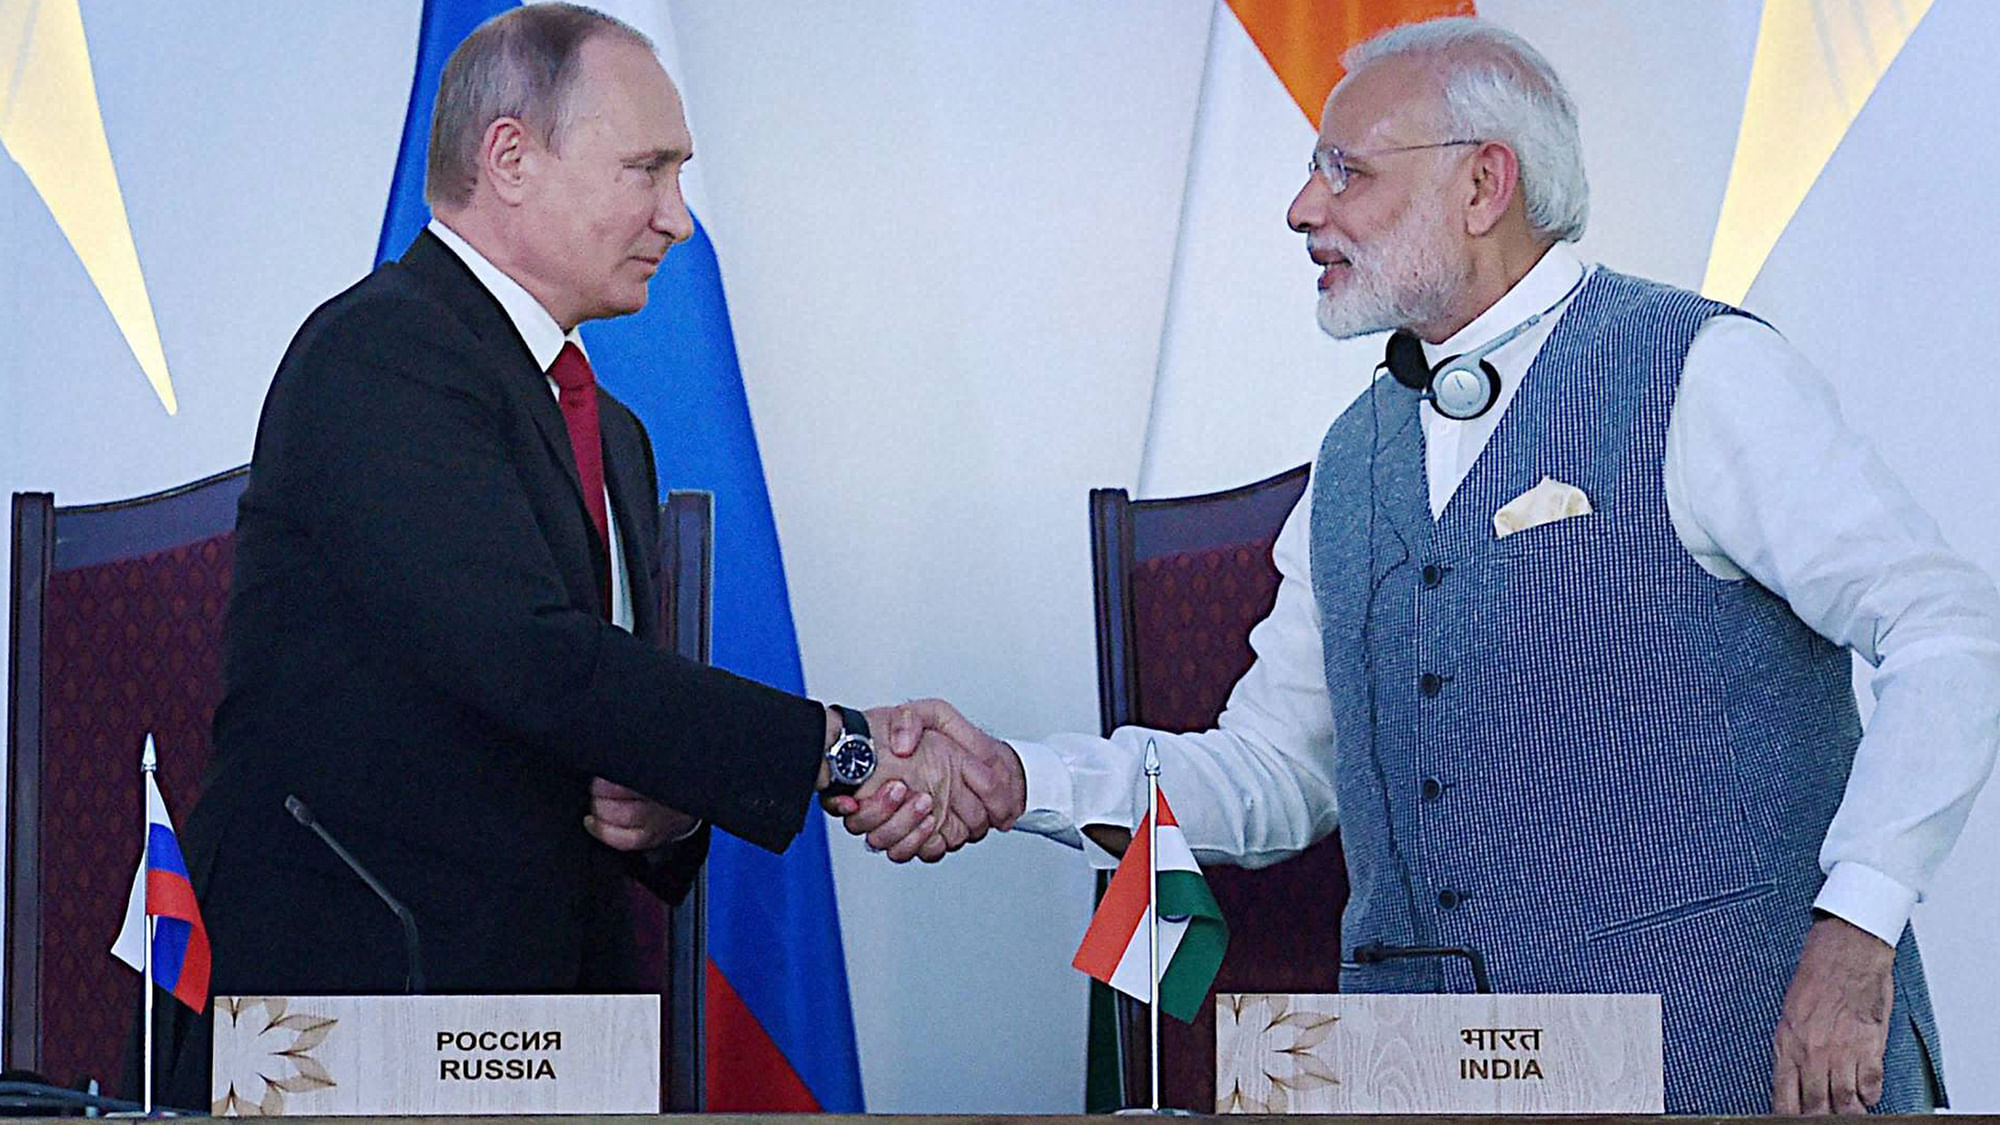 Prime Minister Narendra Modi shakes hands with Russian President Vladimir Putin at the agreement exchange ceremony after the 17th India-Russia annual summit meet in Benaulim, Goa on Saturday. (Photo: PTI)